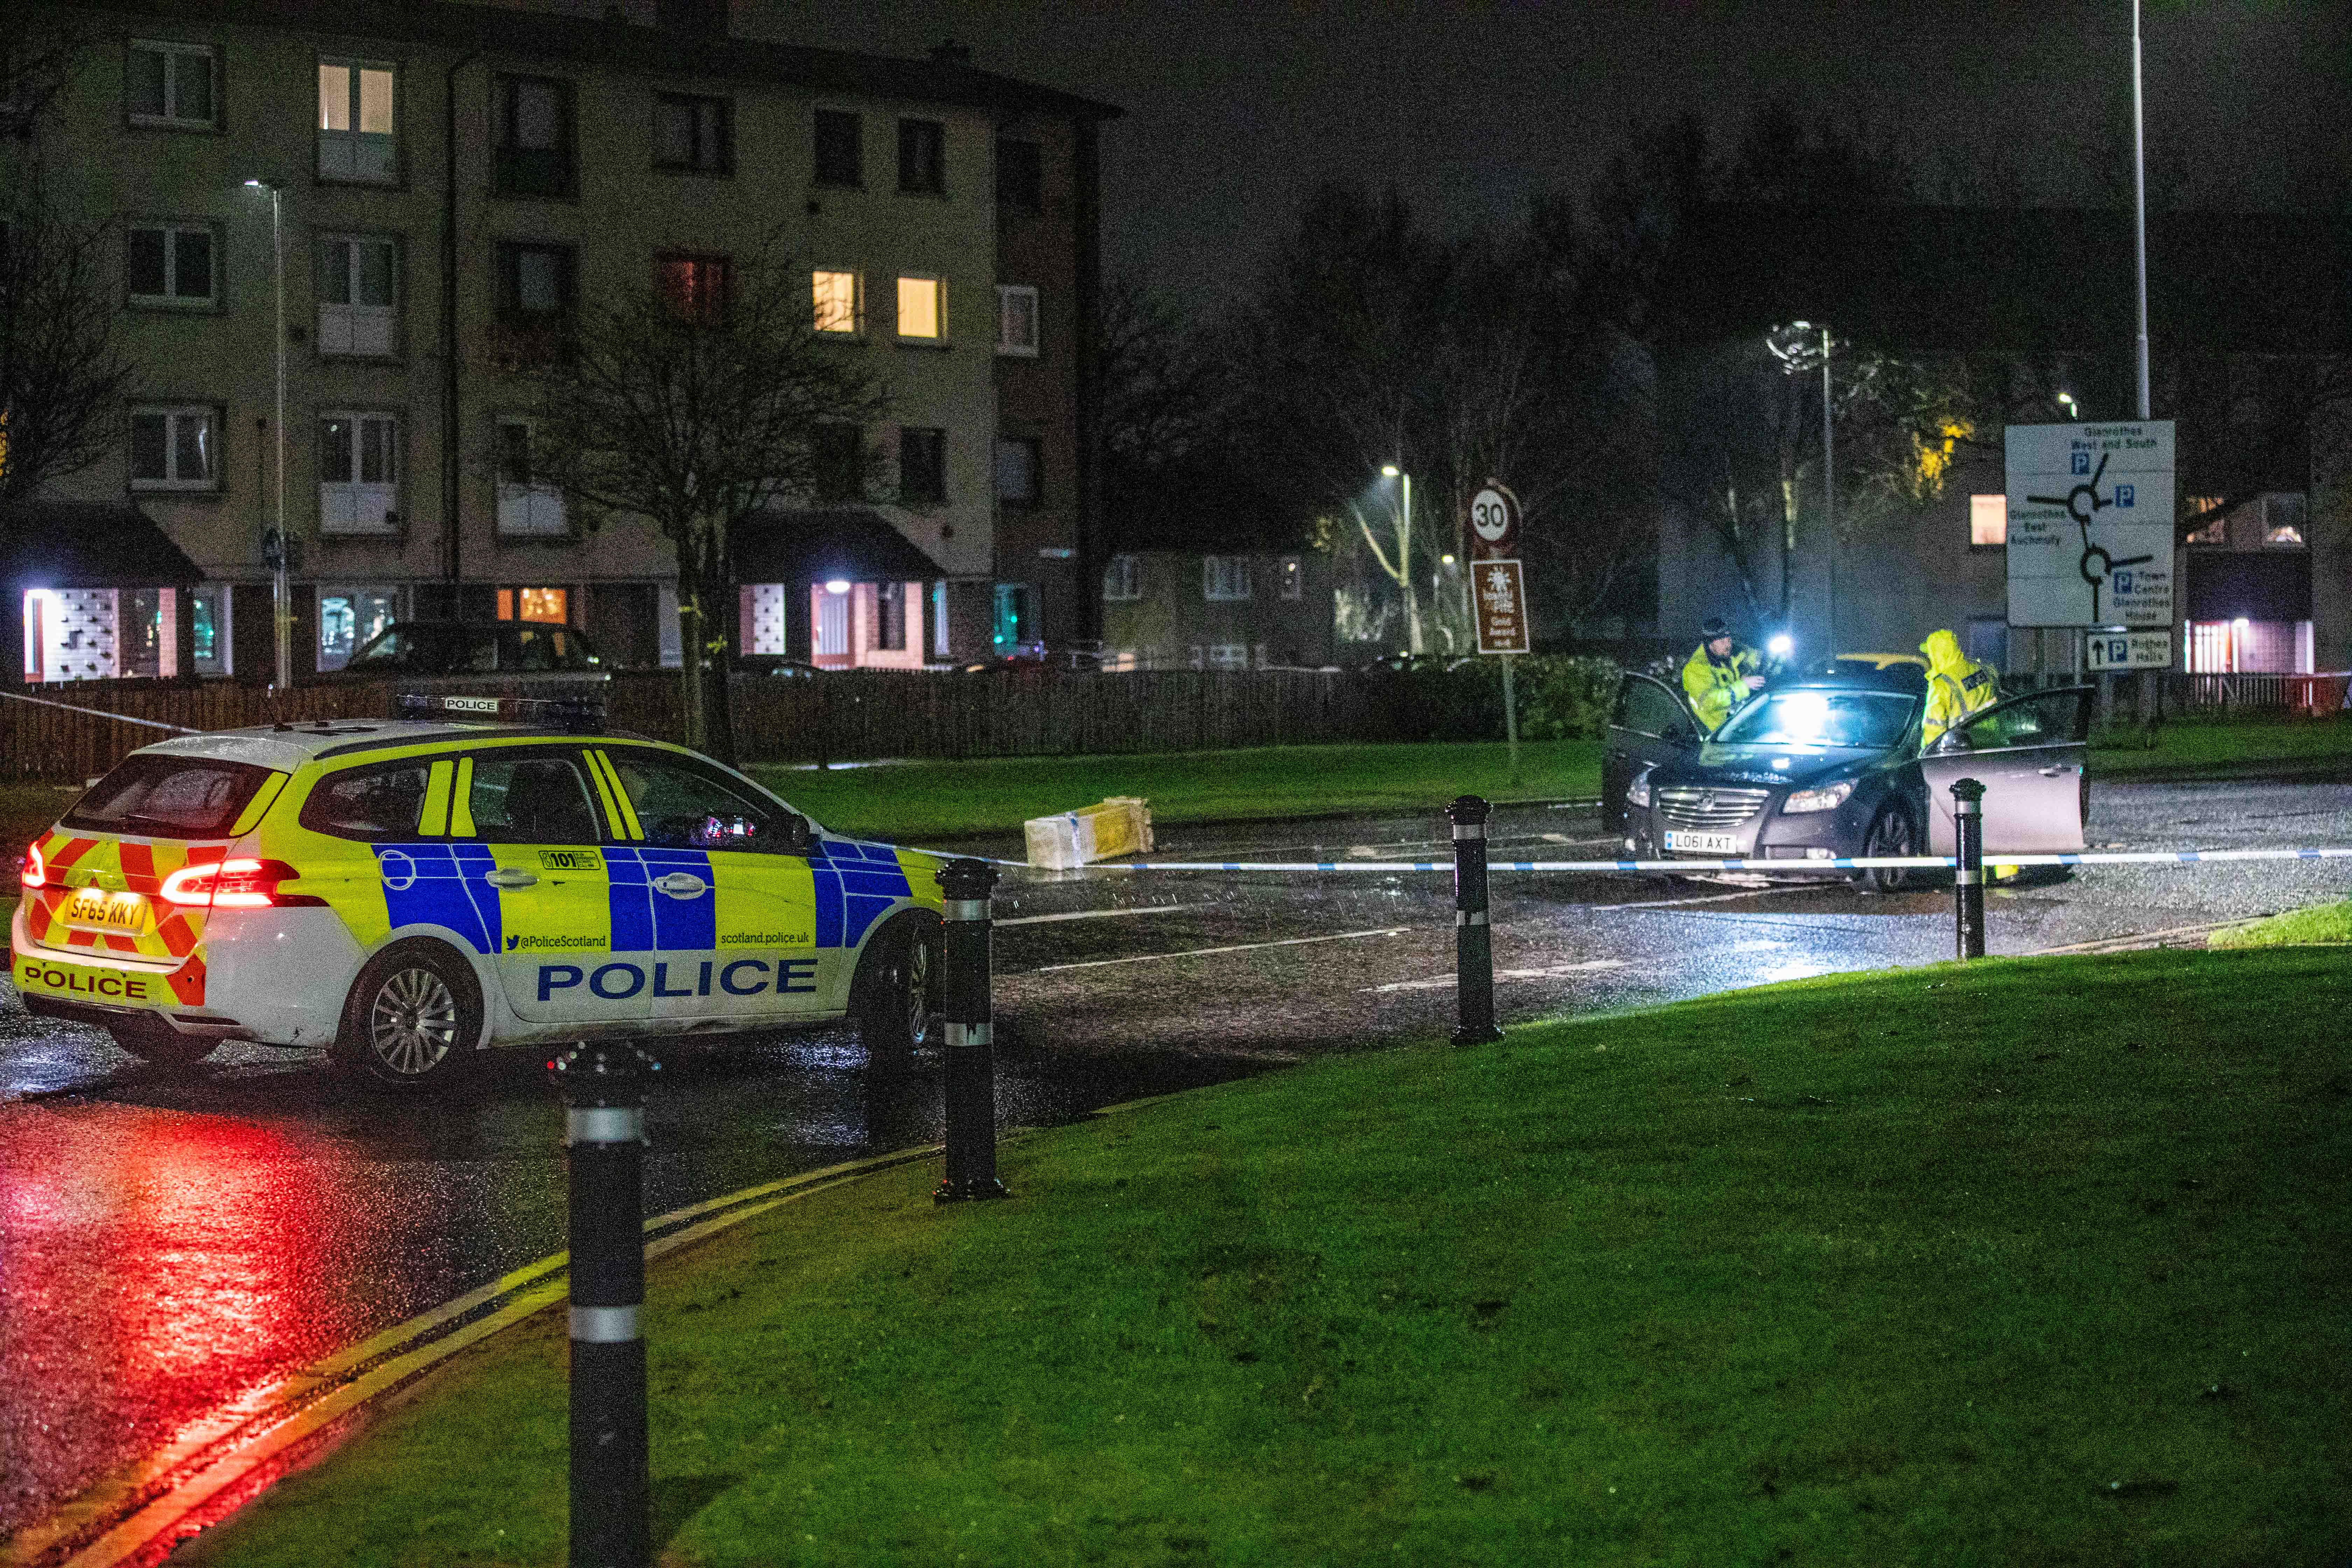 Police on scene examining a Grey Vauxhall Insignia after reports of a pedestrian being involved in the accident on Church Street, Glenrothes late Saturday night.